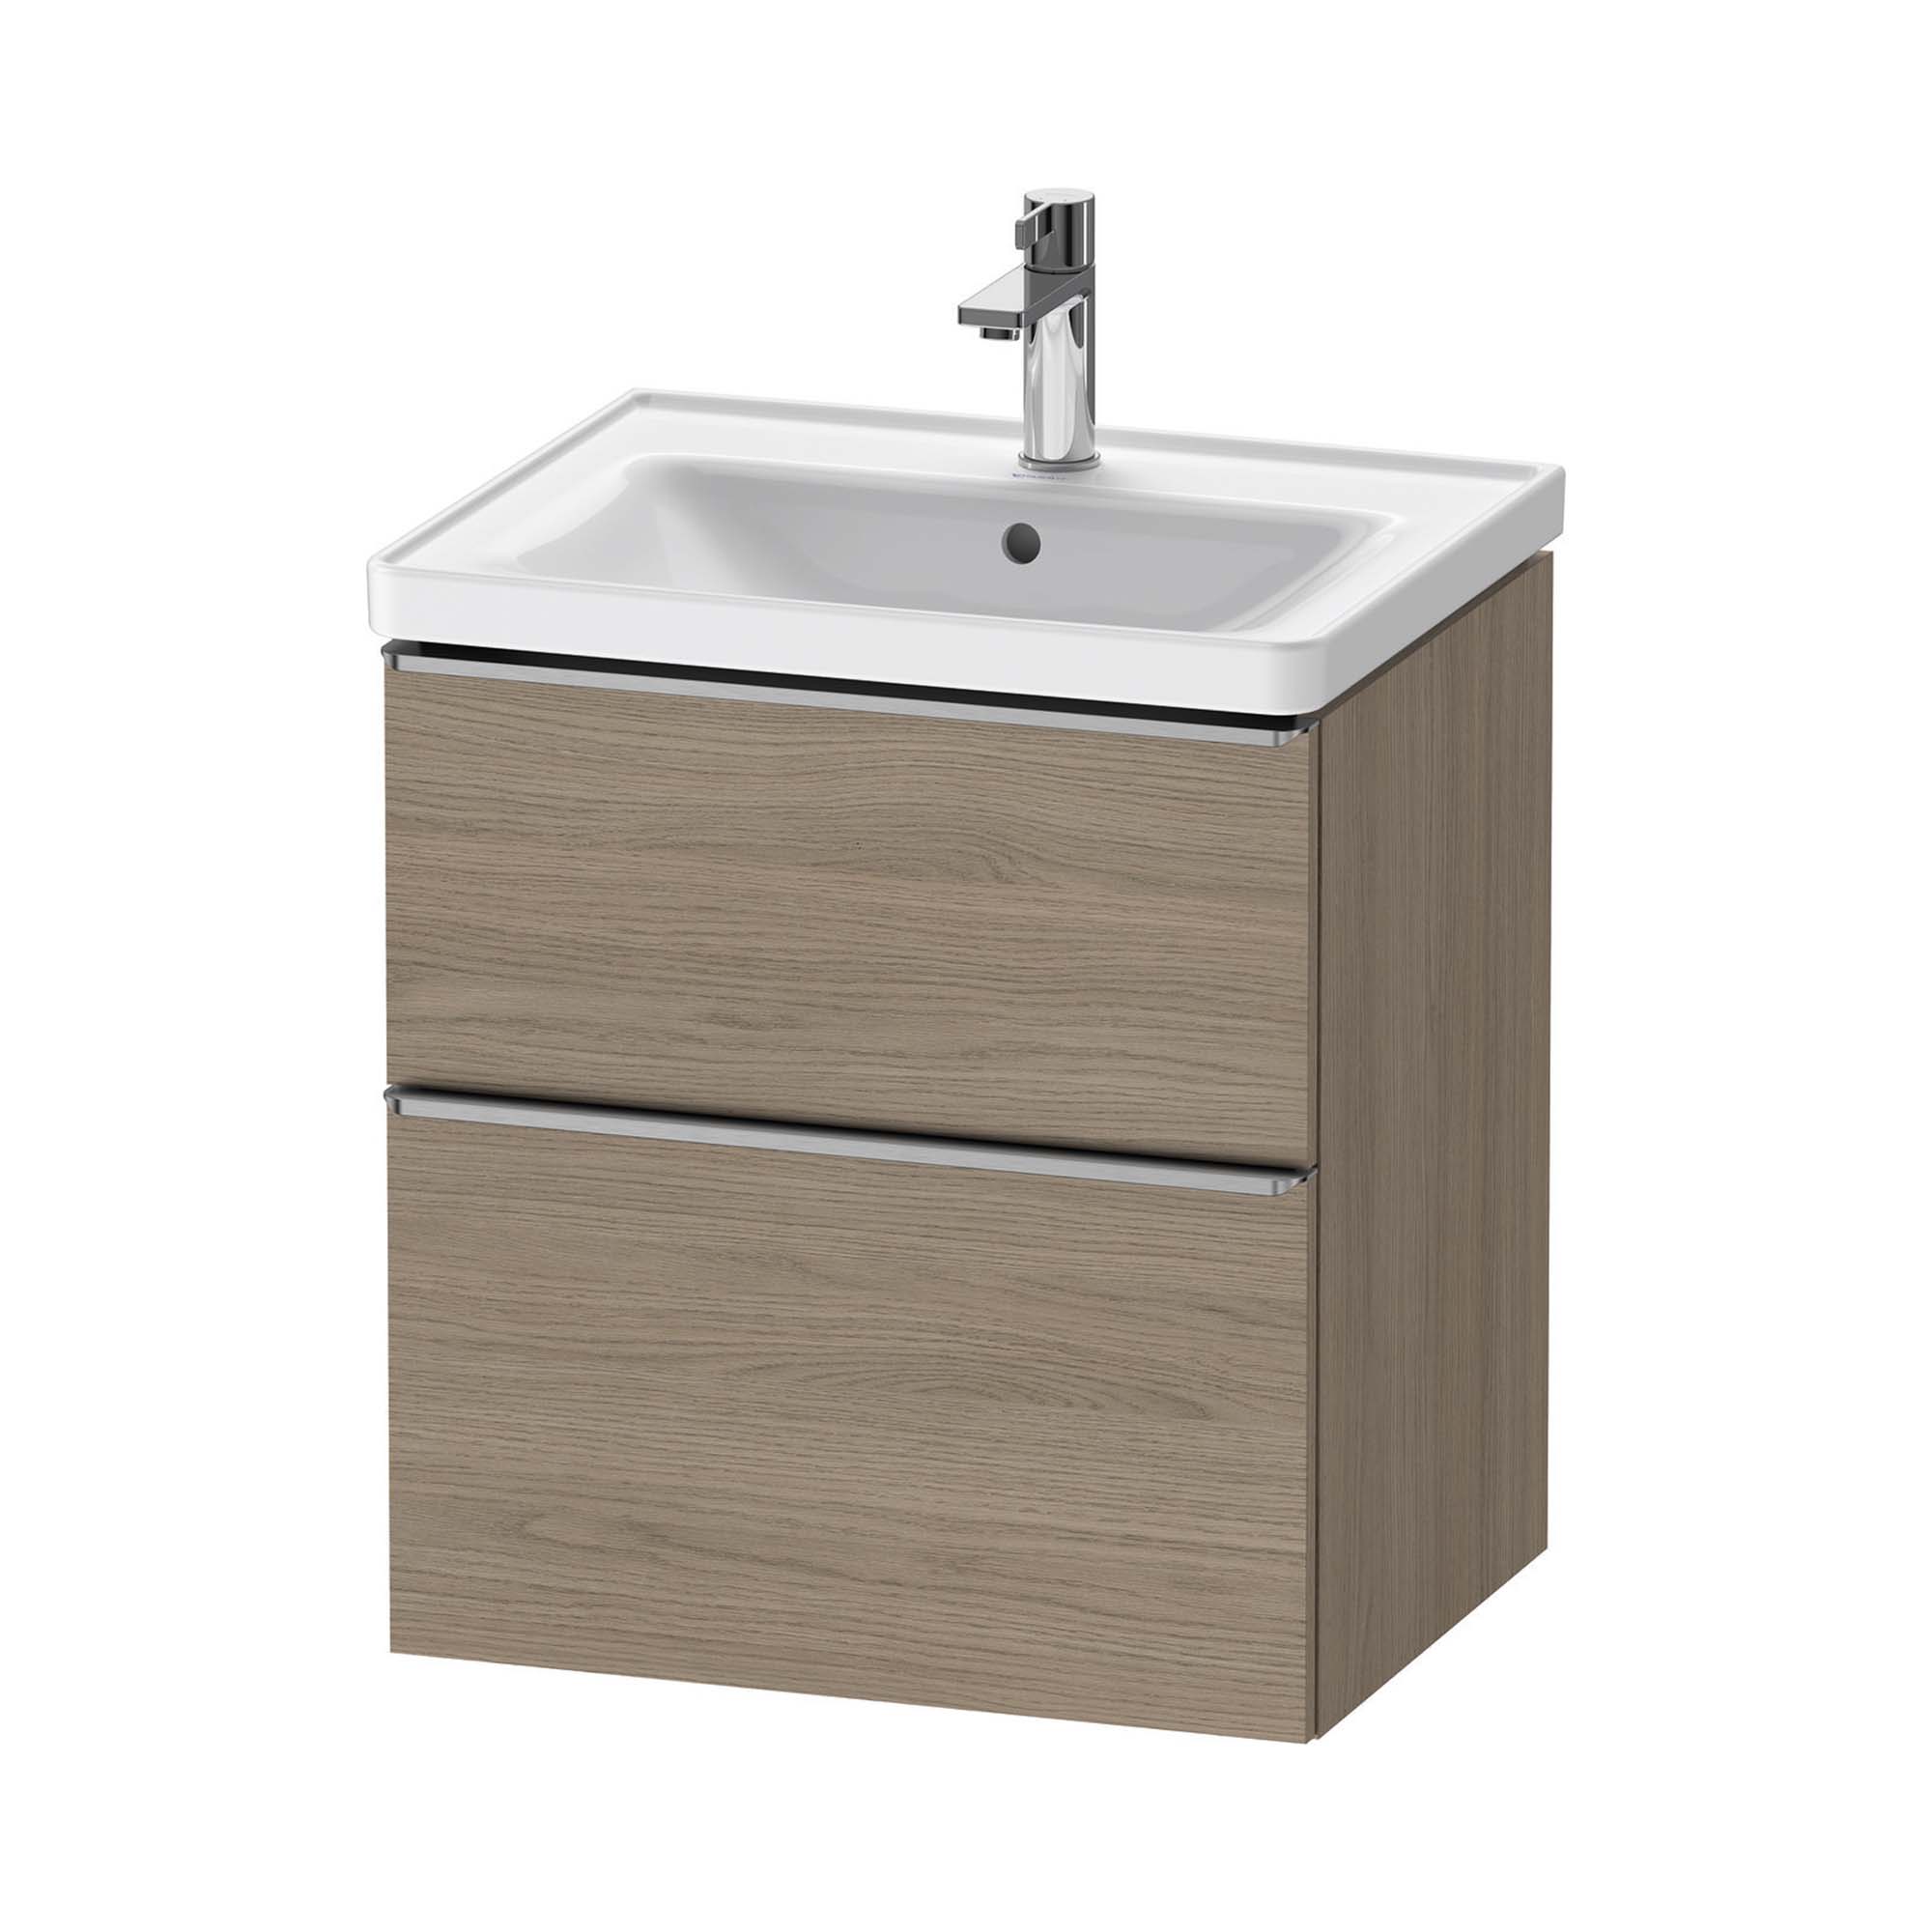 duravit d-neo 600 wall mounted vanity unit with d-neo basin oak terra stainless steel handles